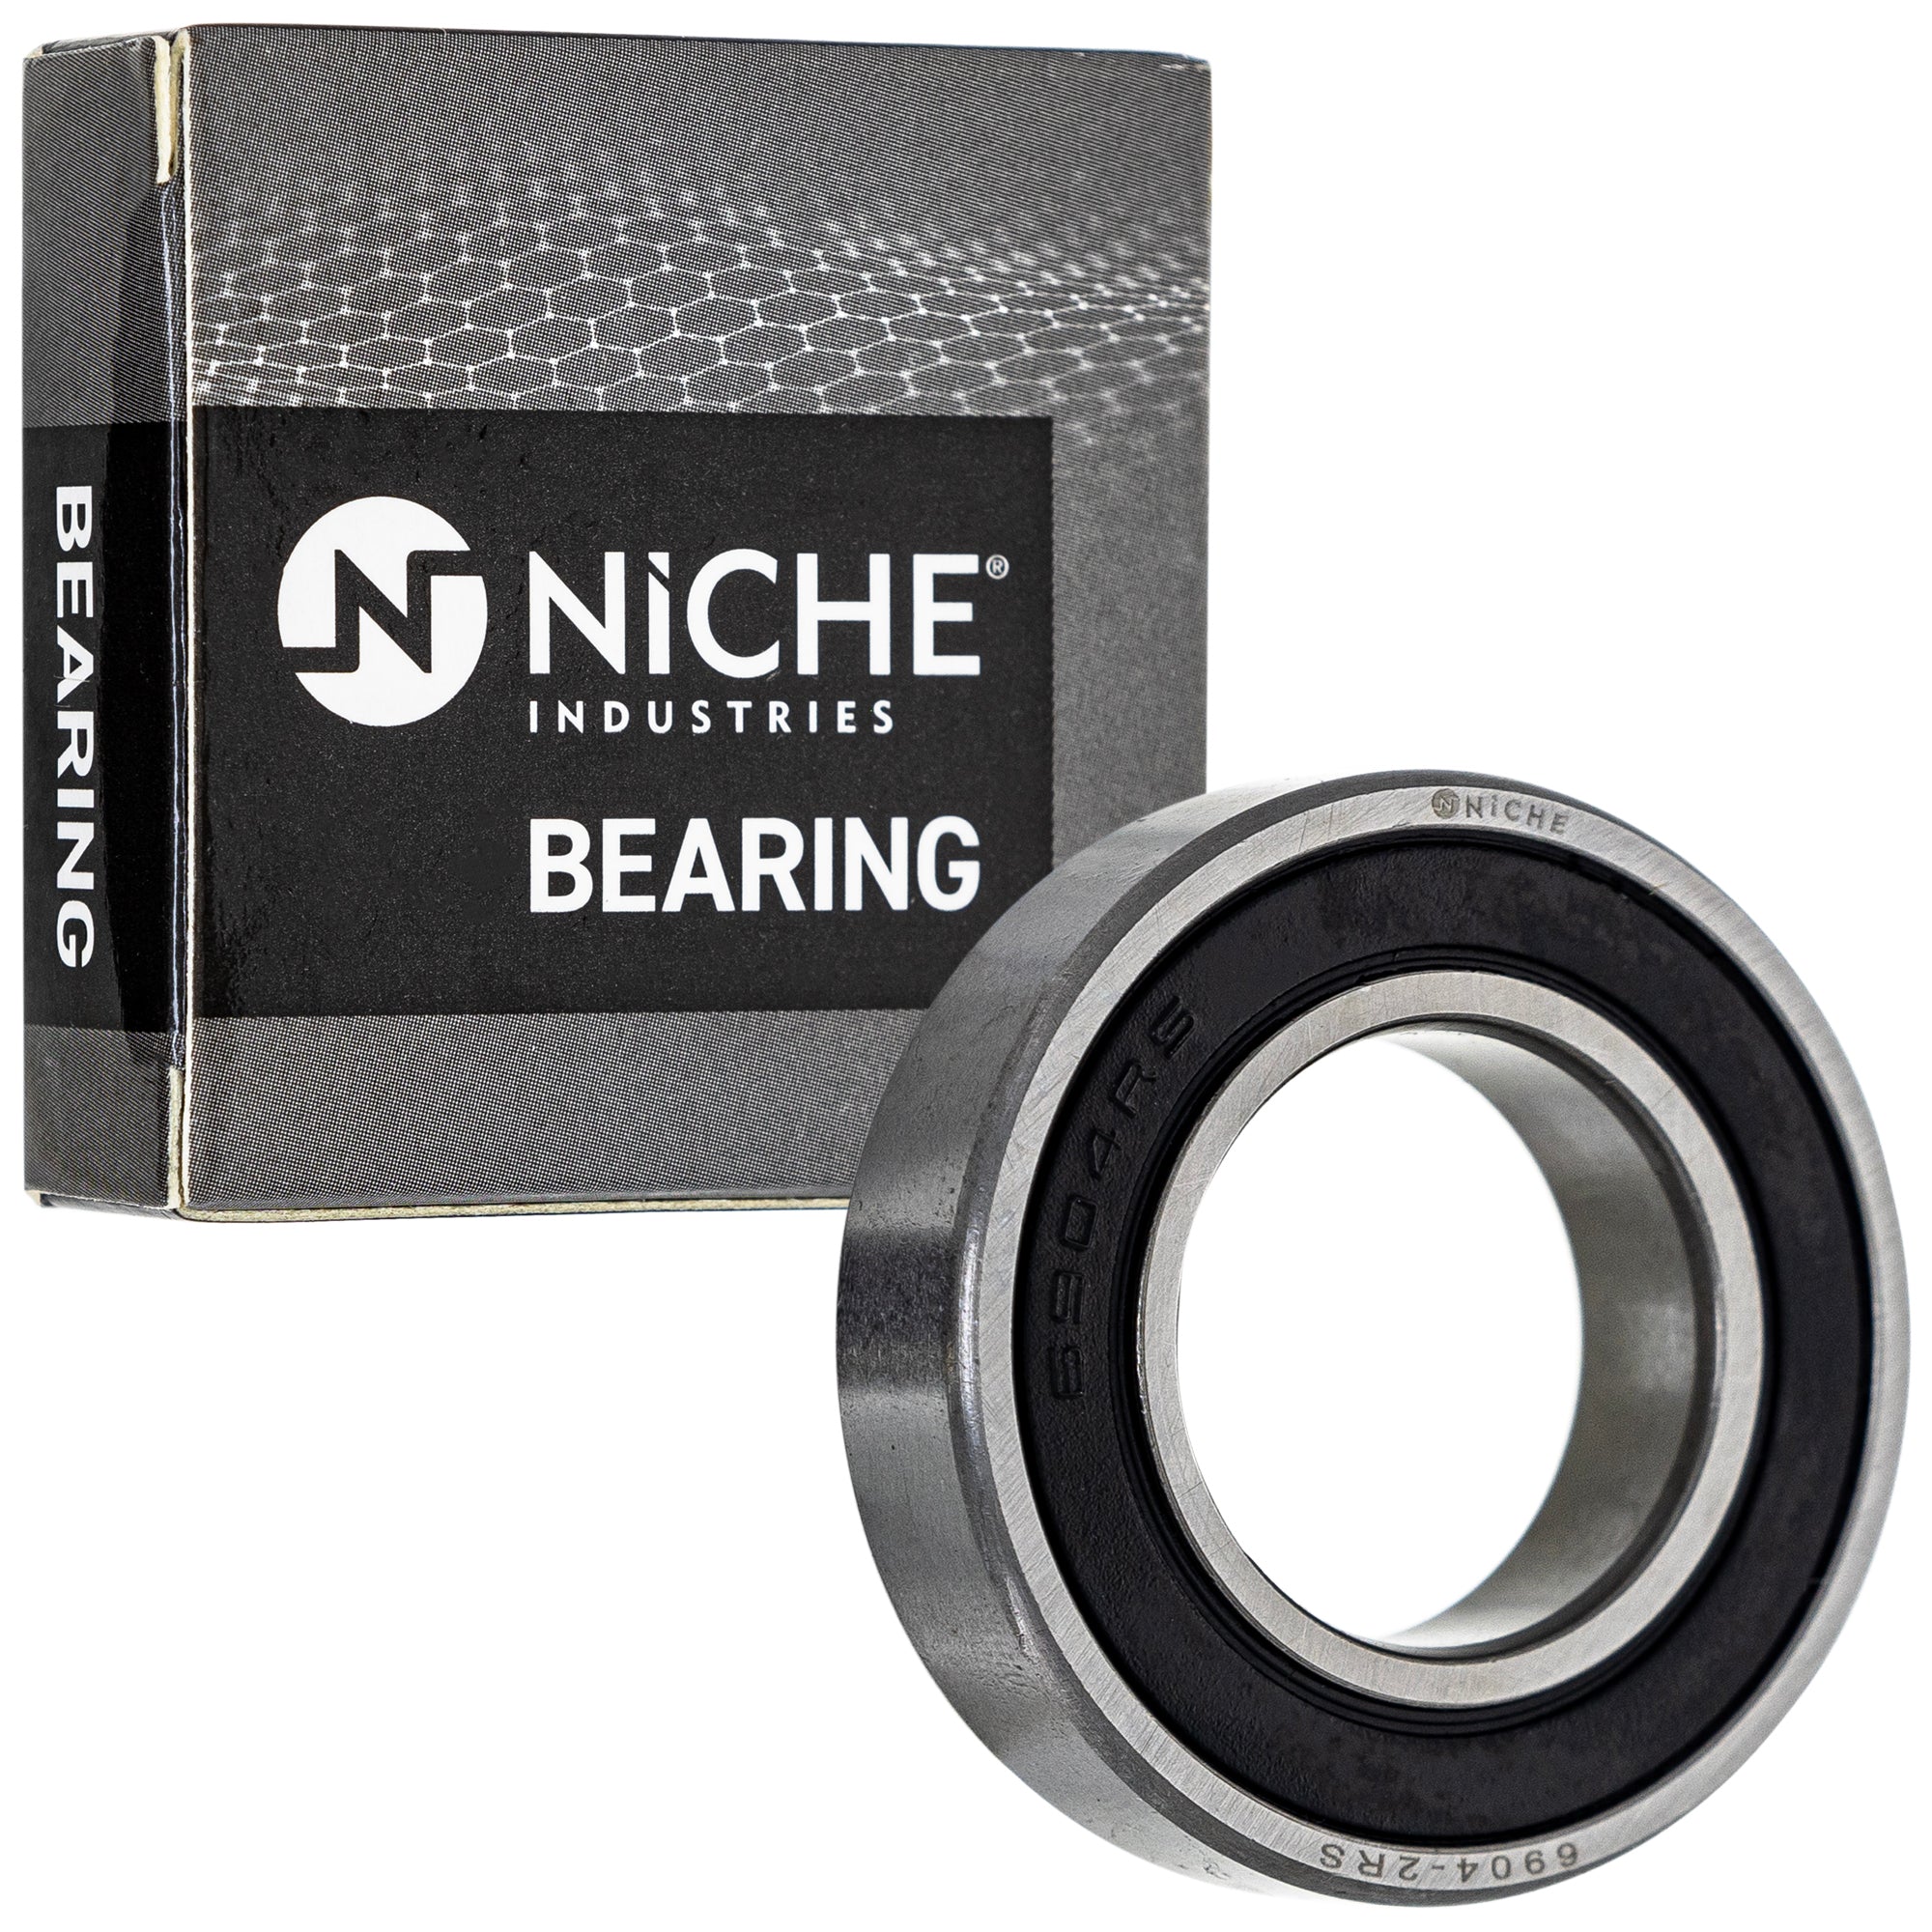 NICHE 519-CBB2258R Bearing 10-Pack for zOTHER YZ450F YZ426F YZ400F